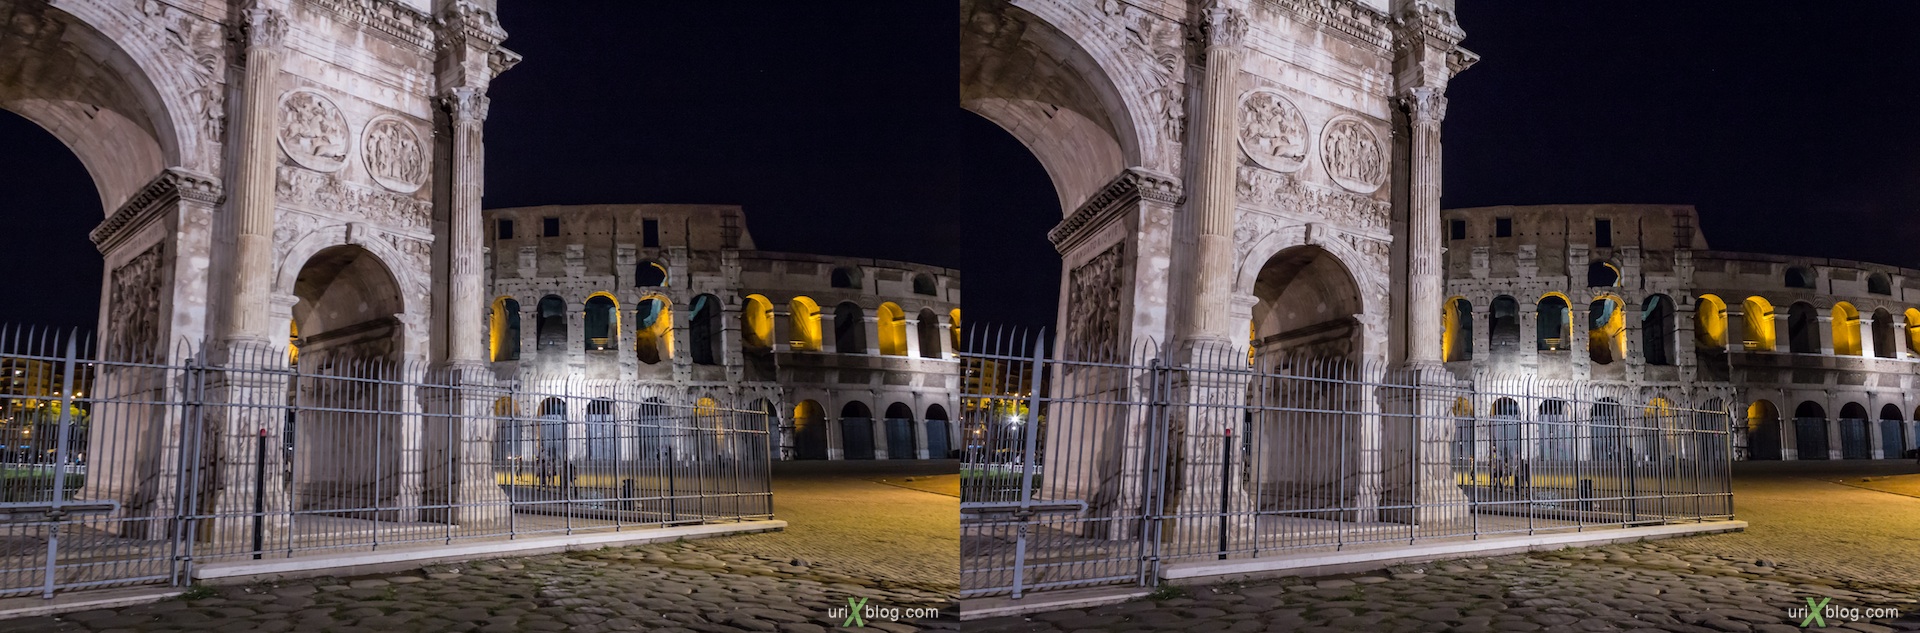 2012, Colosseum, Coliseum, Flavian Amphitheatre, Arch of Constantine, Rome, Italy, night, 3D, stereo pair, cross-eyed, crossview, cross view stereo pair